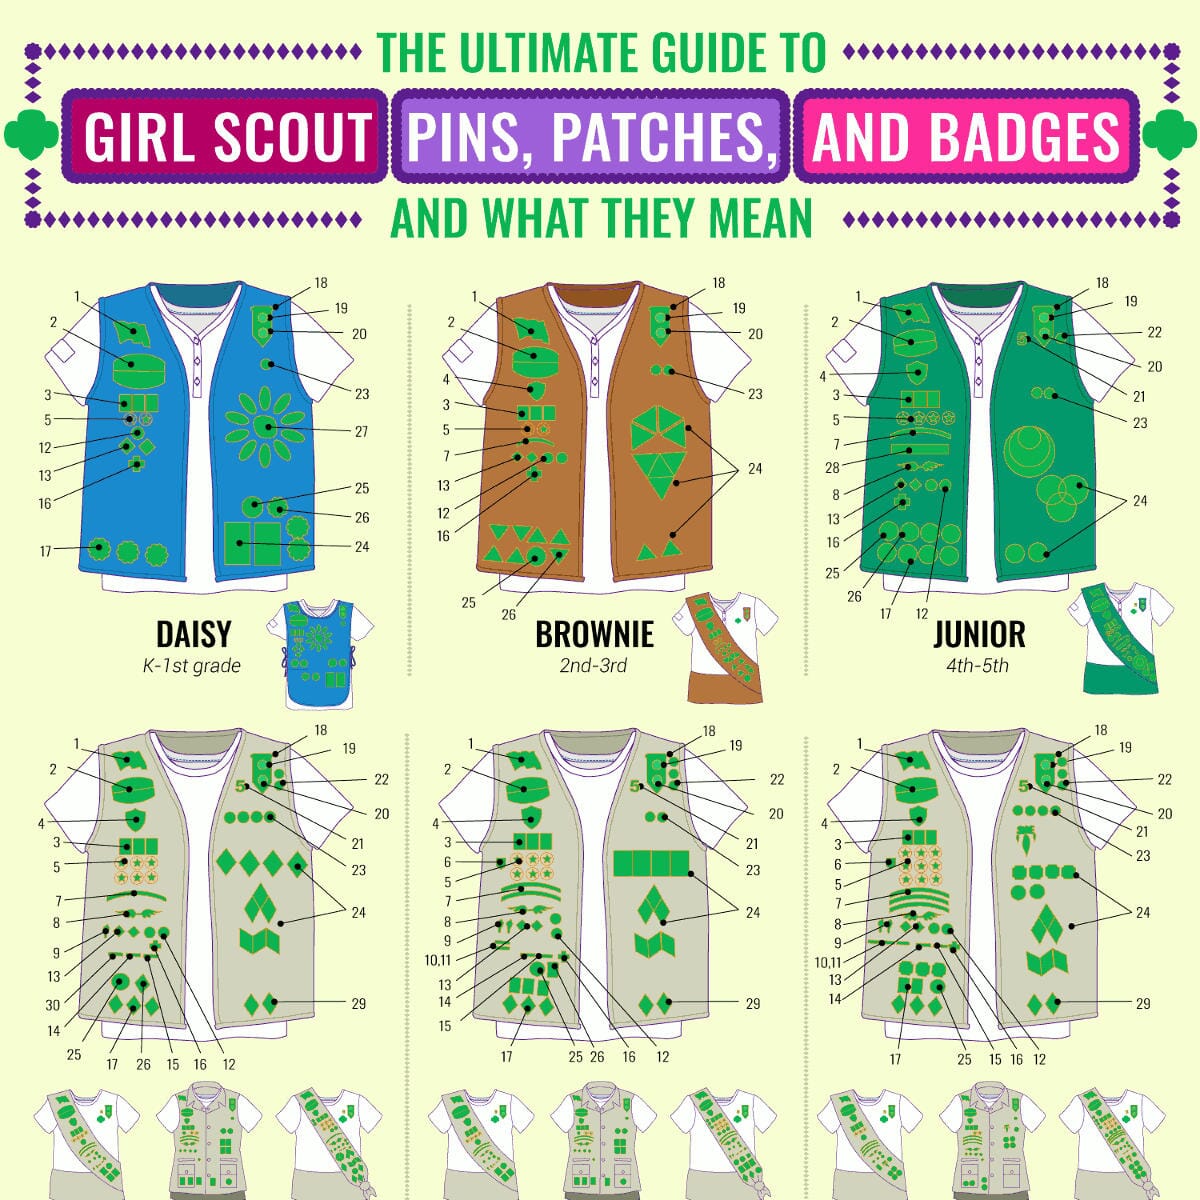 The Ultimate Guide to Girl Scout Pins and Patches and What They Mean